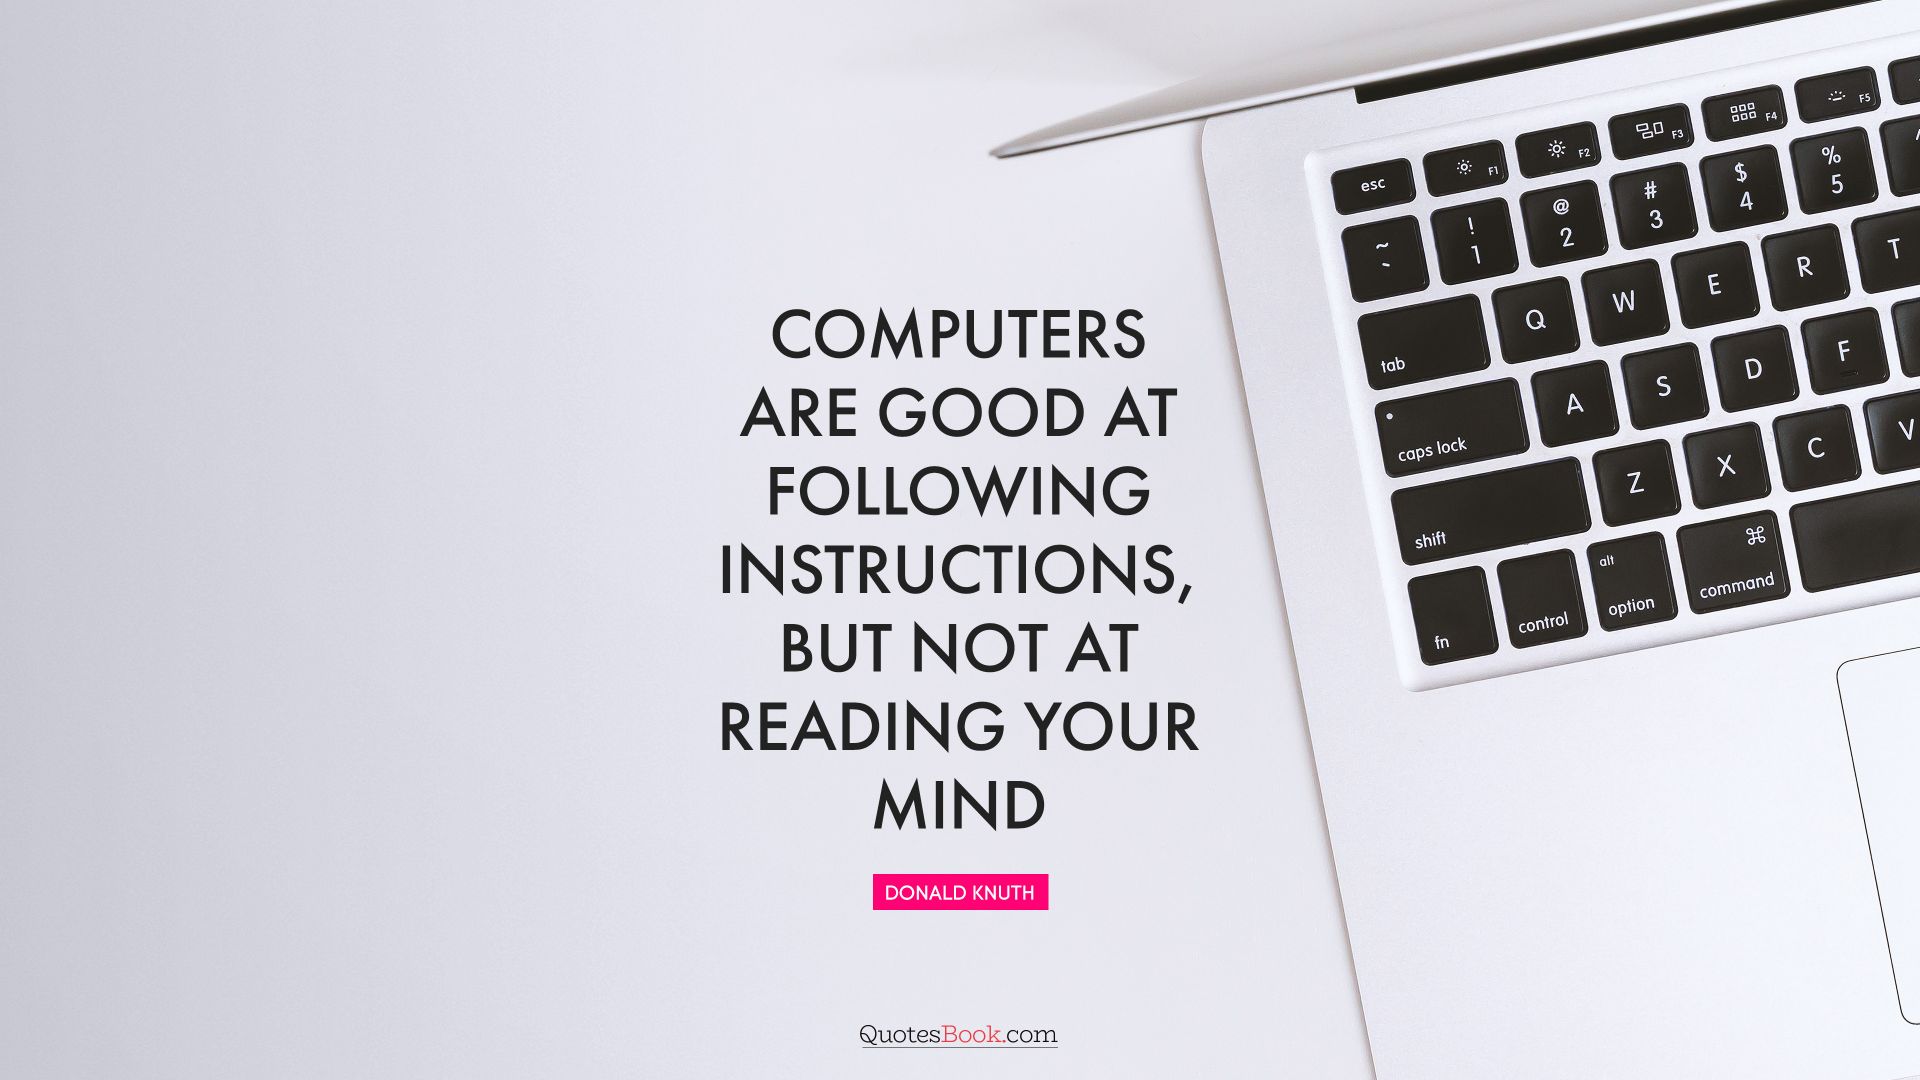 Computers are good at following instructions, but not at reading your mind. - Quote by Donald Knuth